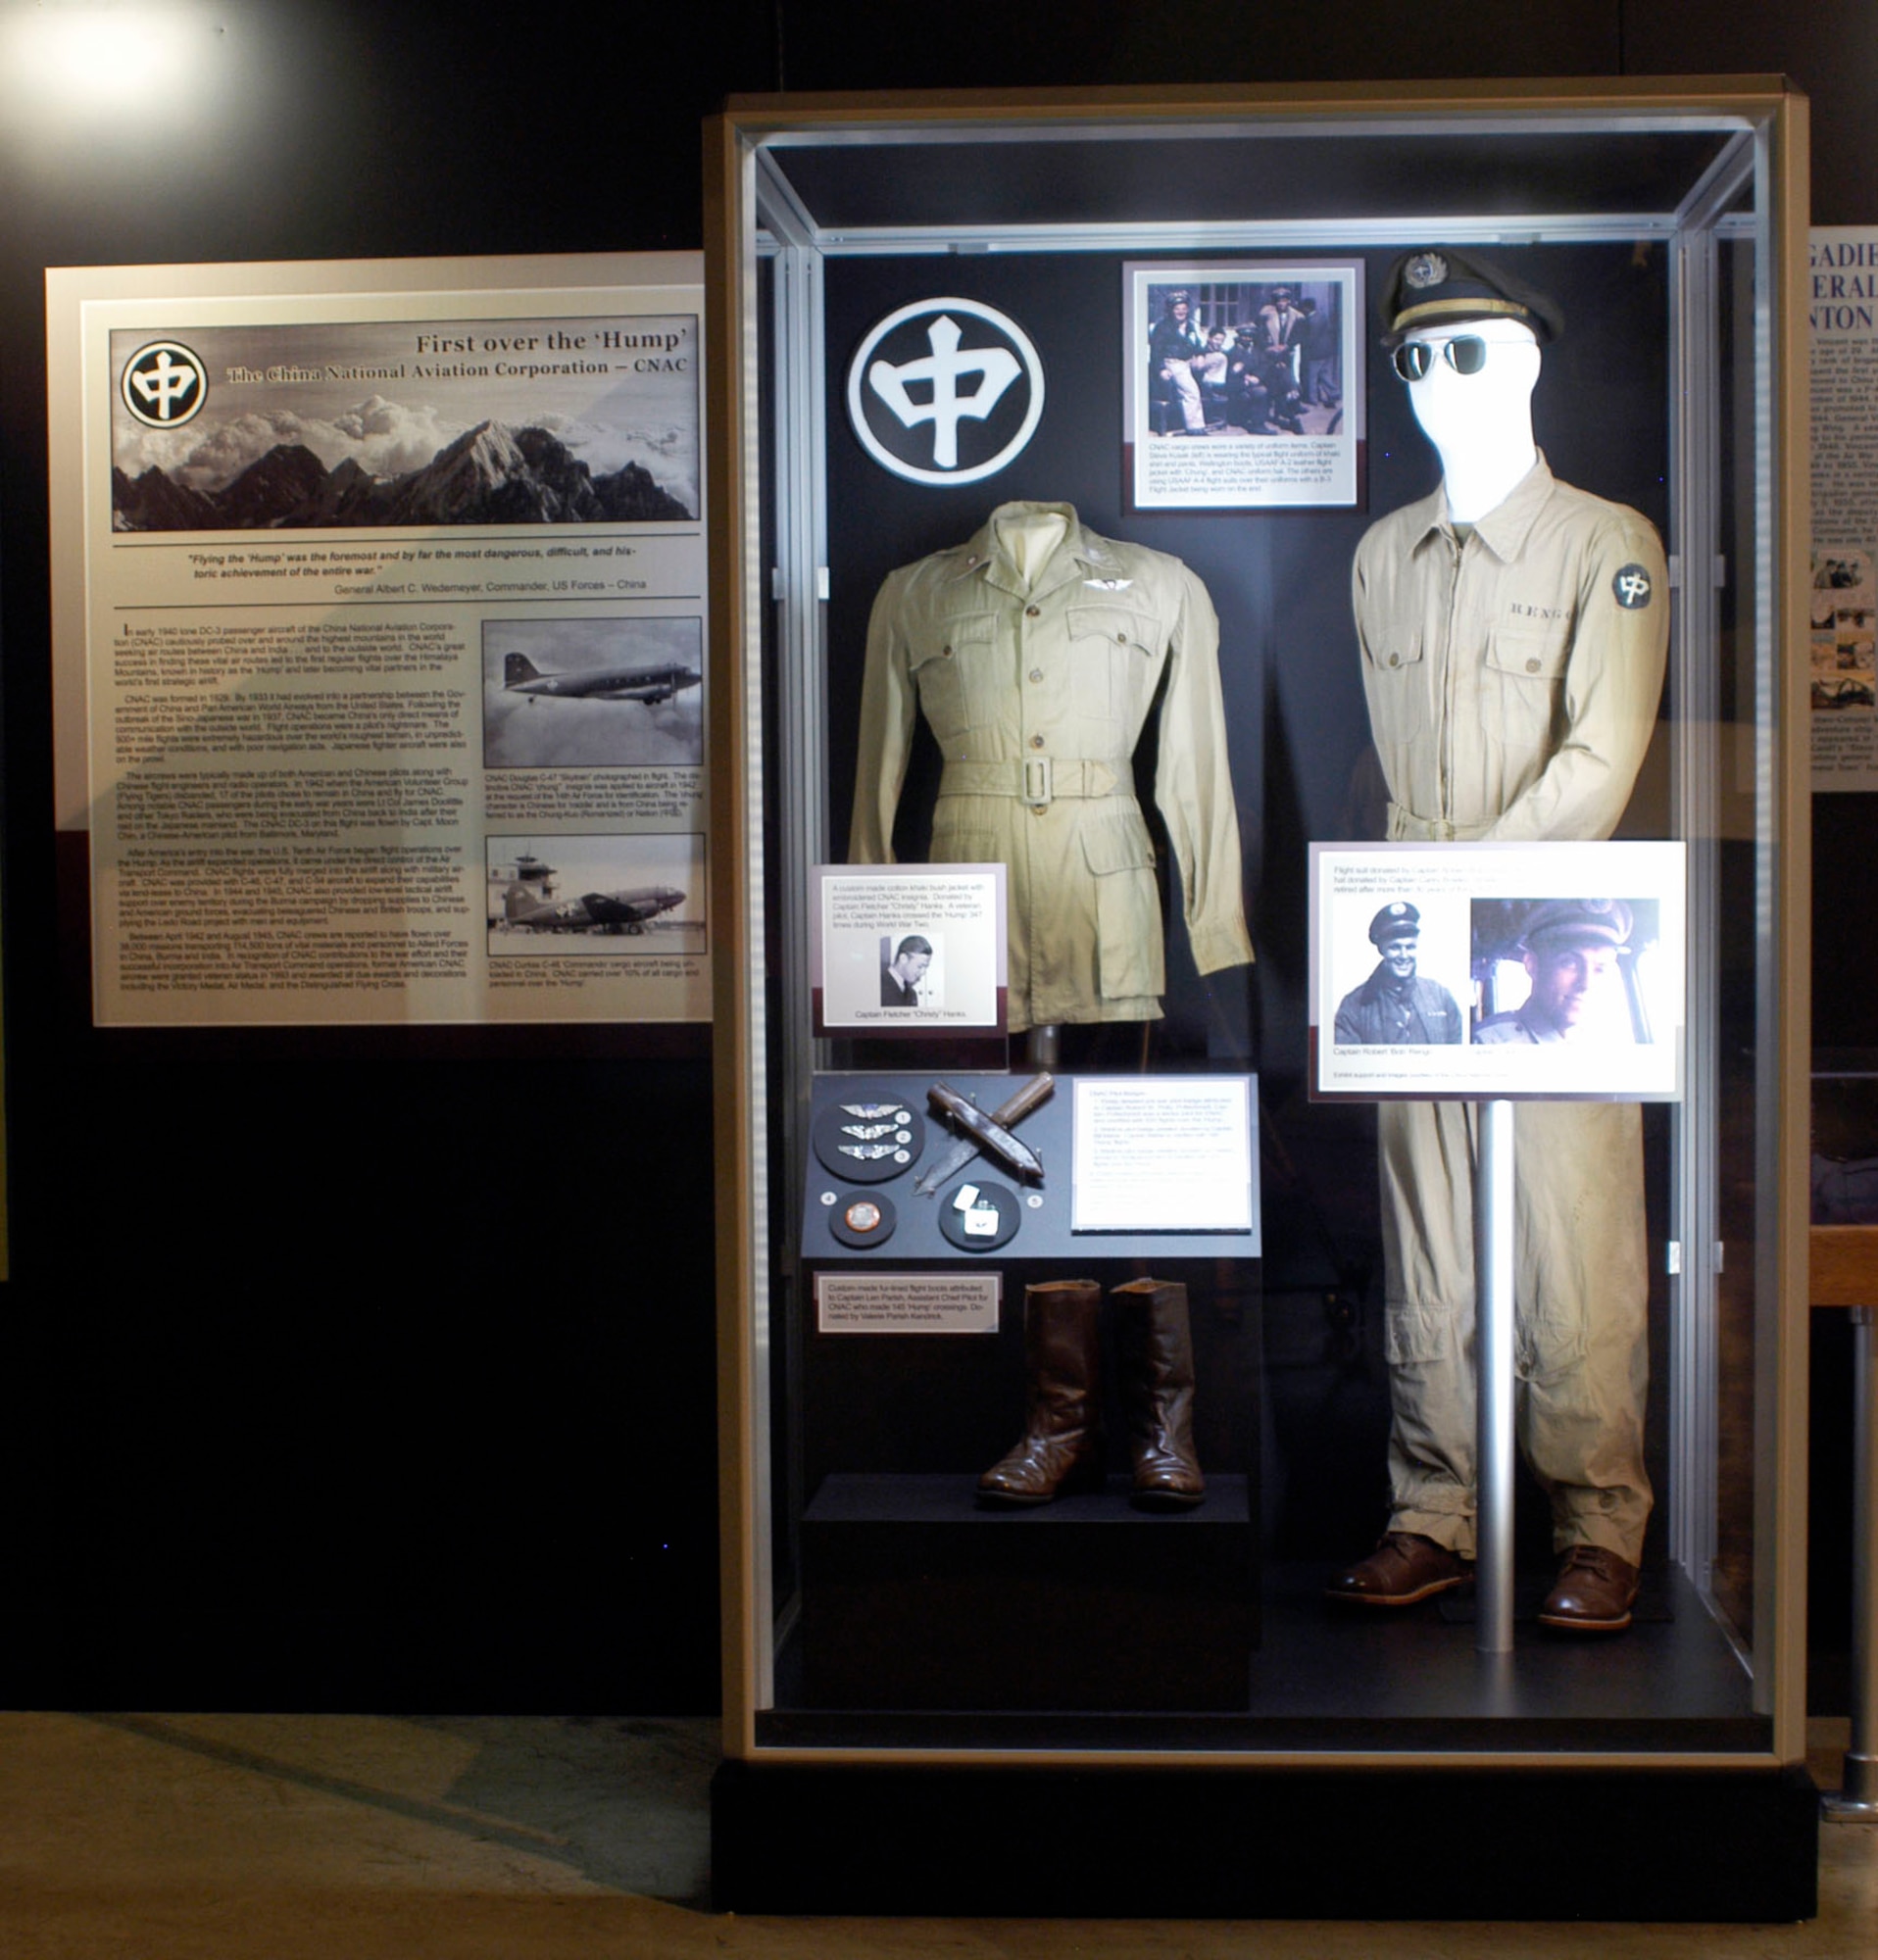 DAYTON, Ohio -- China National Aviation Corporation (CNAC) exhibit in the World War II Gallery at the National Museum of the U.S. Air Force. (U.S. Air Force photo)